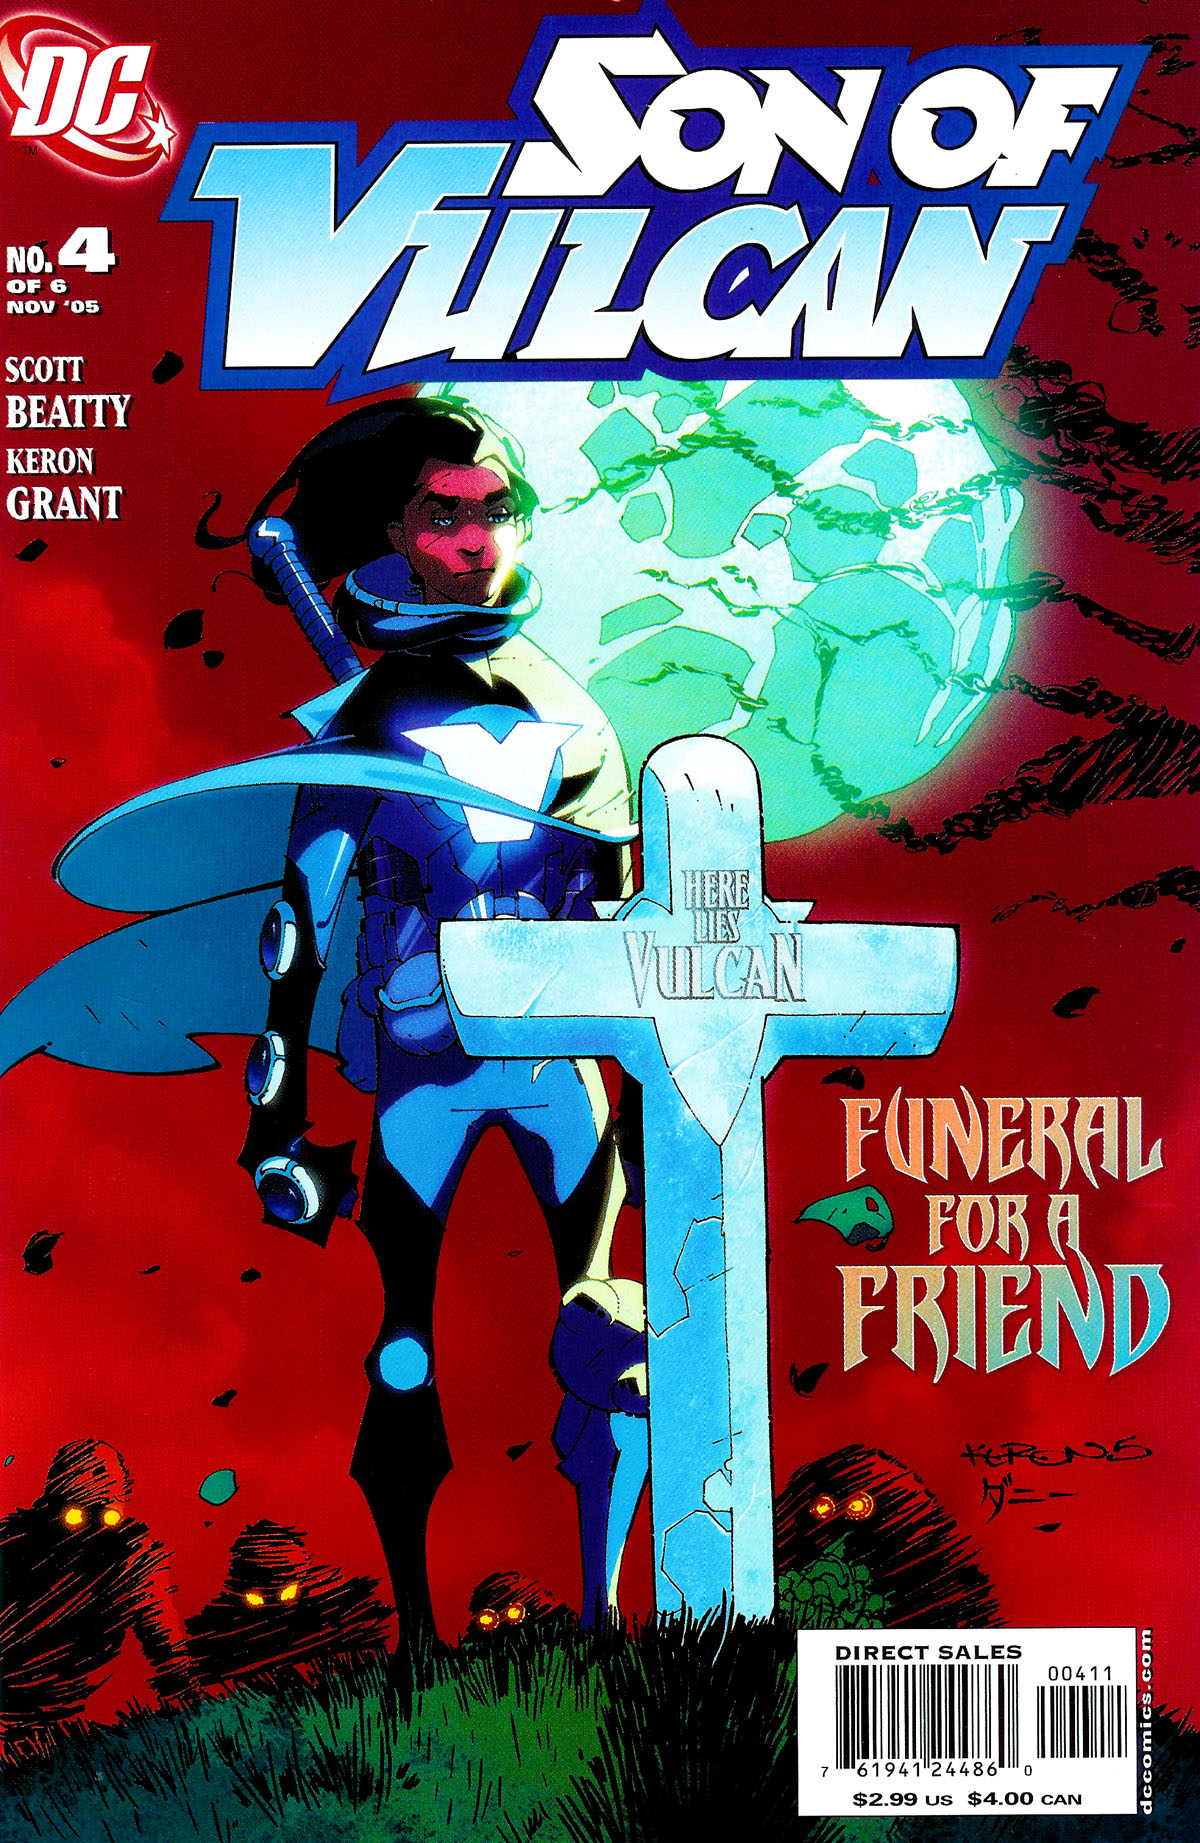 Read online Son of Vulcan comic -  Issue #4 - 1